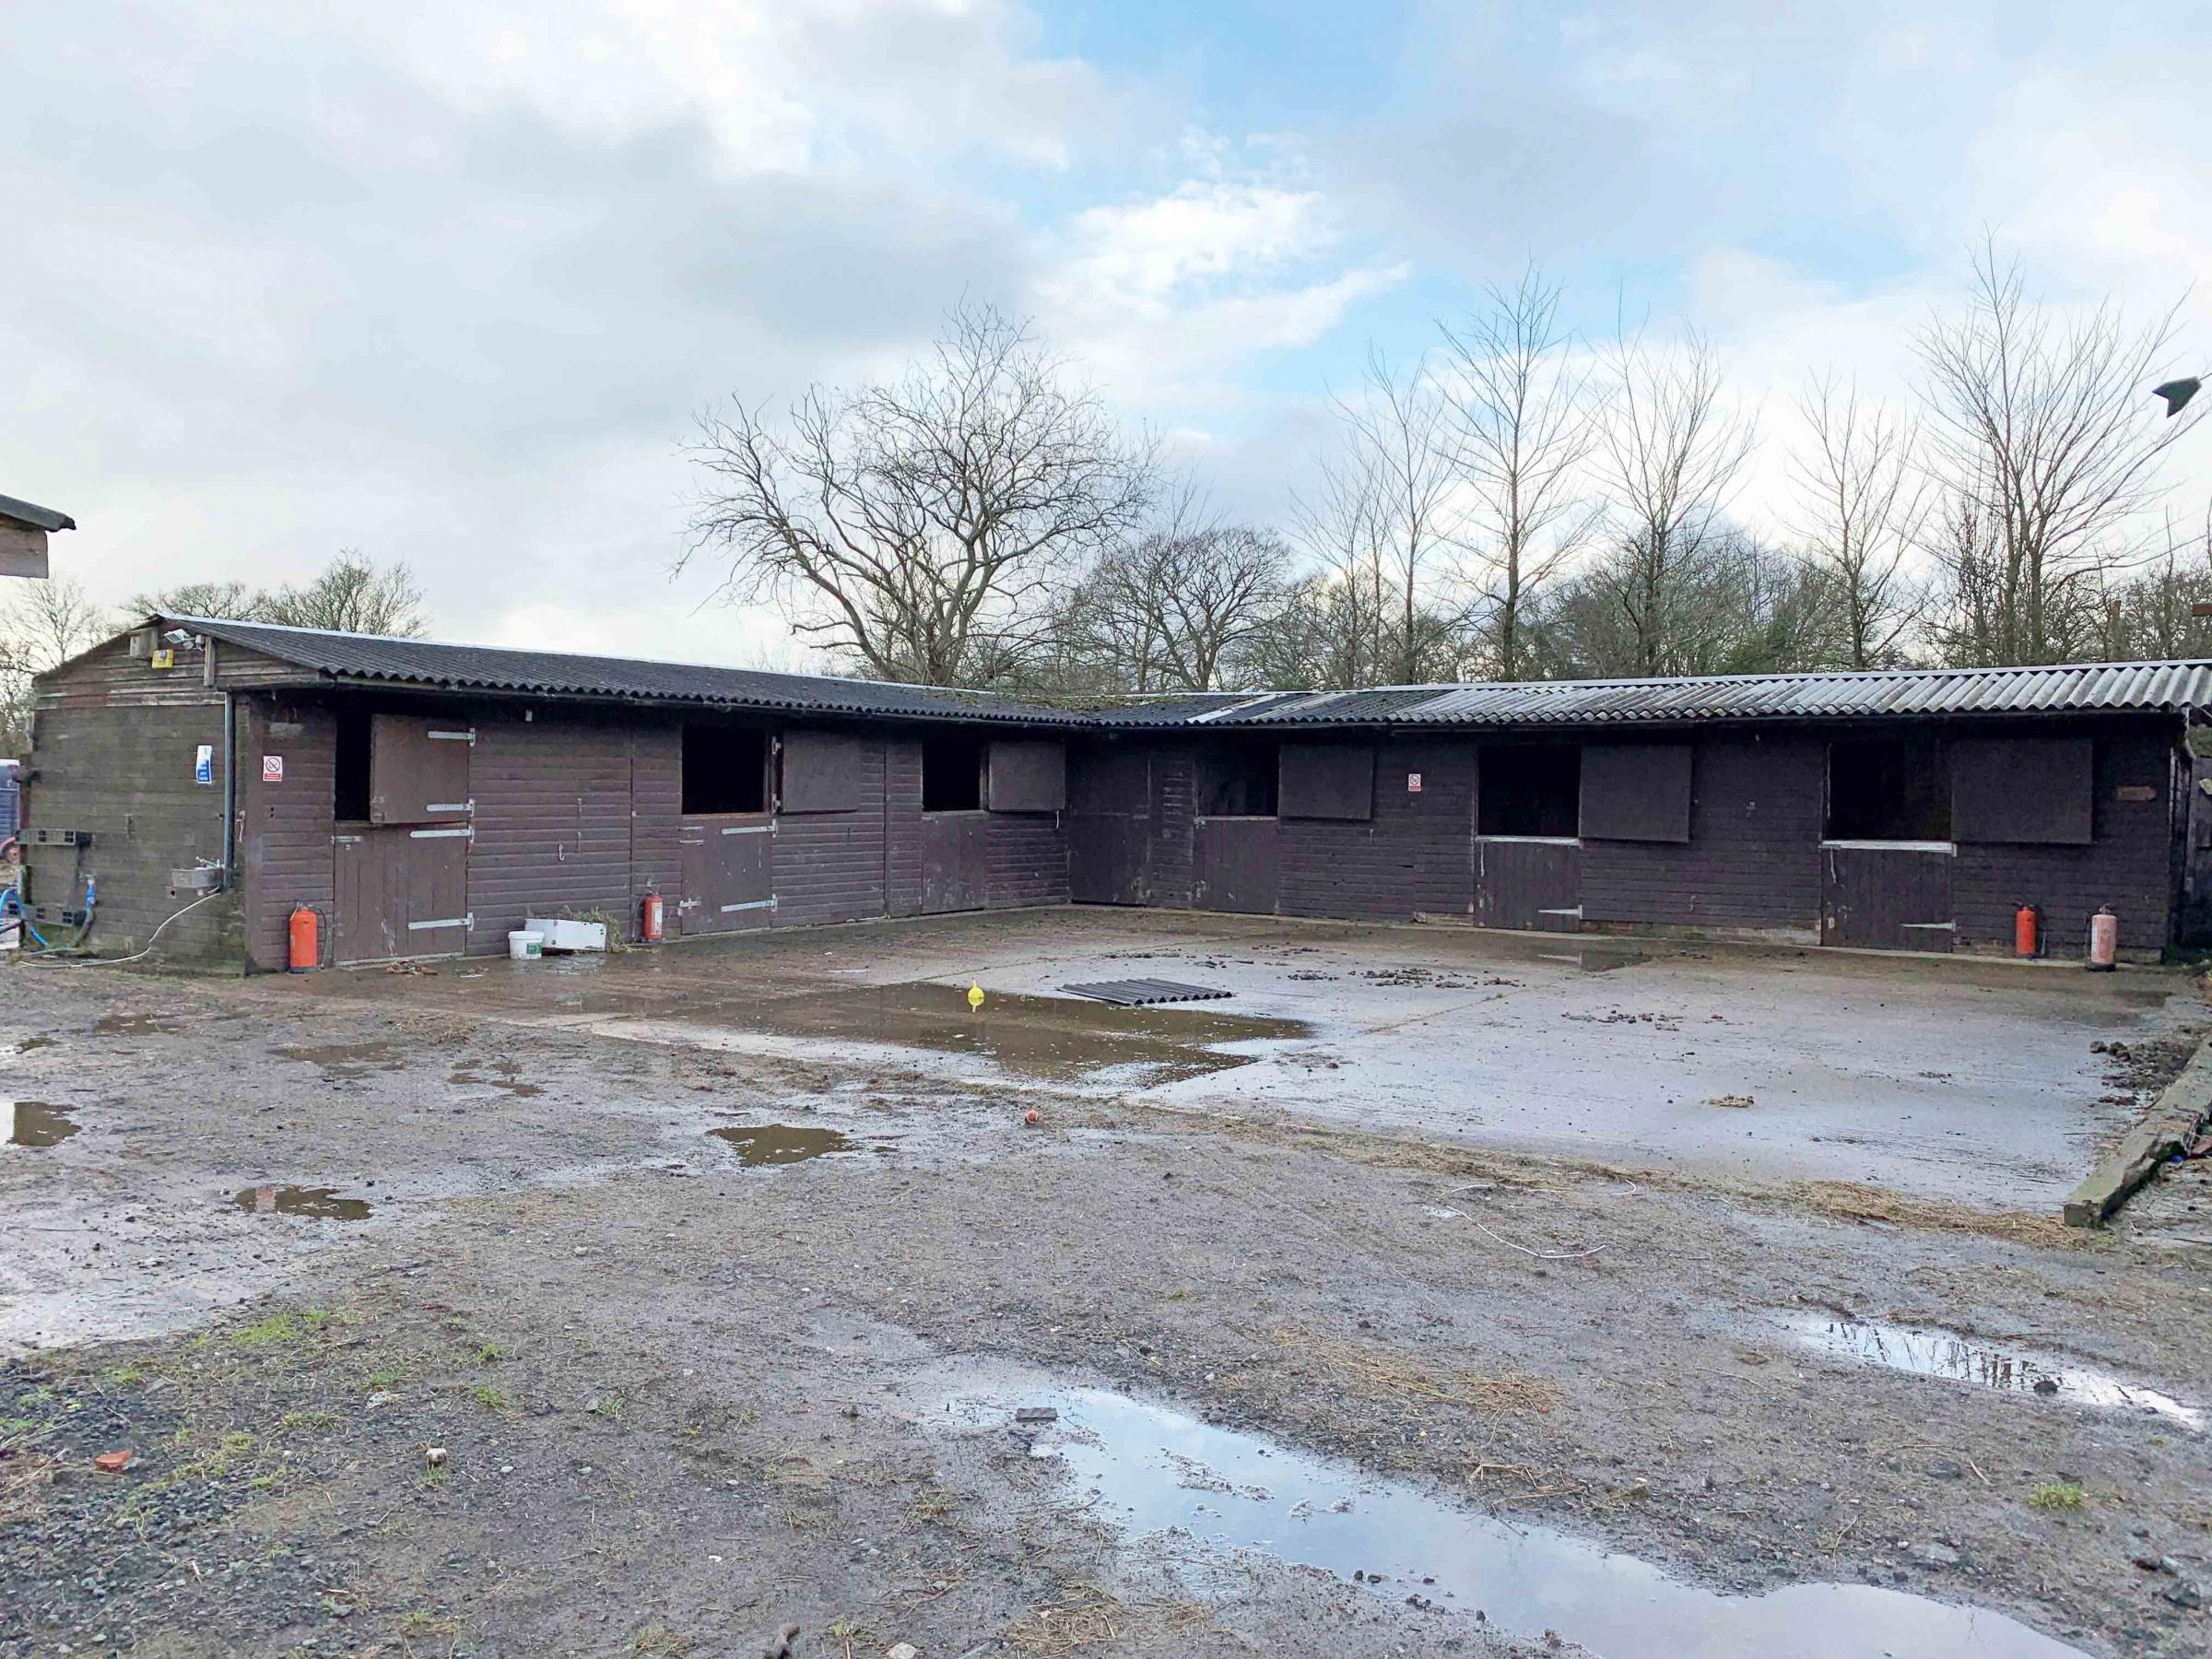 An online bidding war erupted as stable buildings with potential and land near Eastbourne